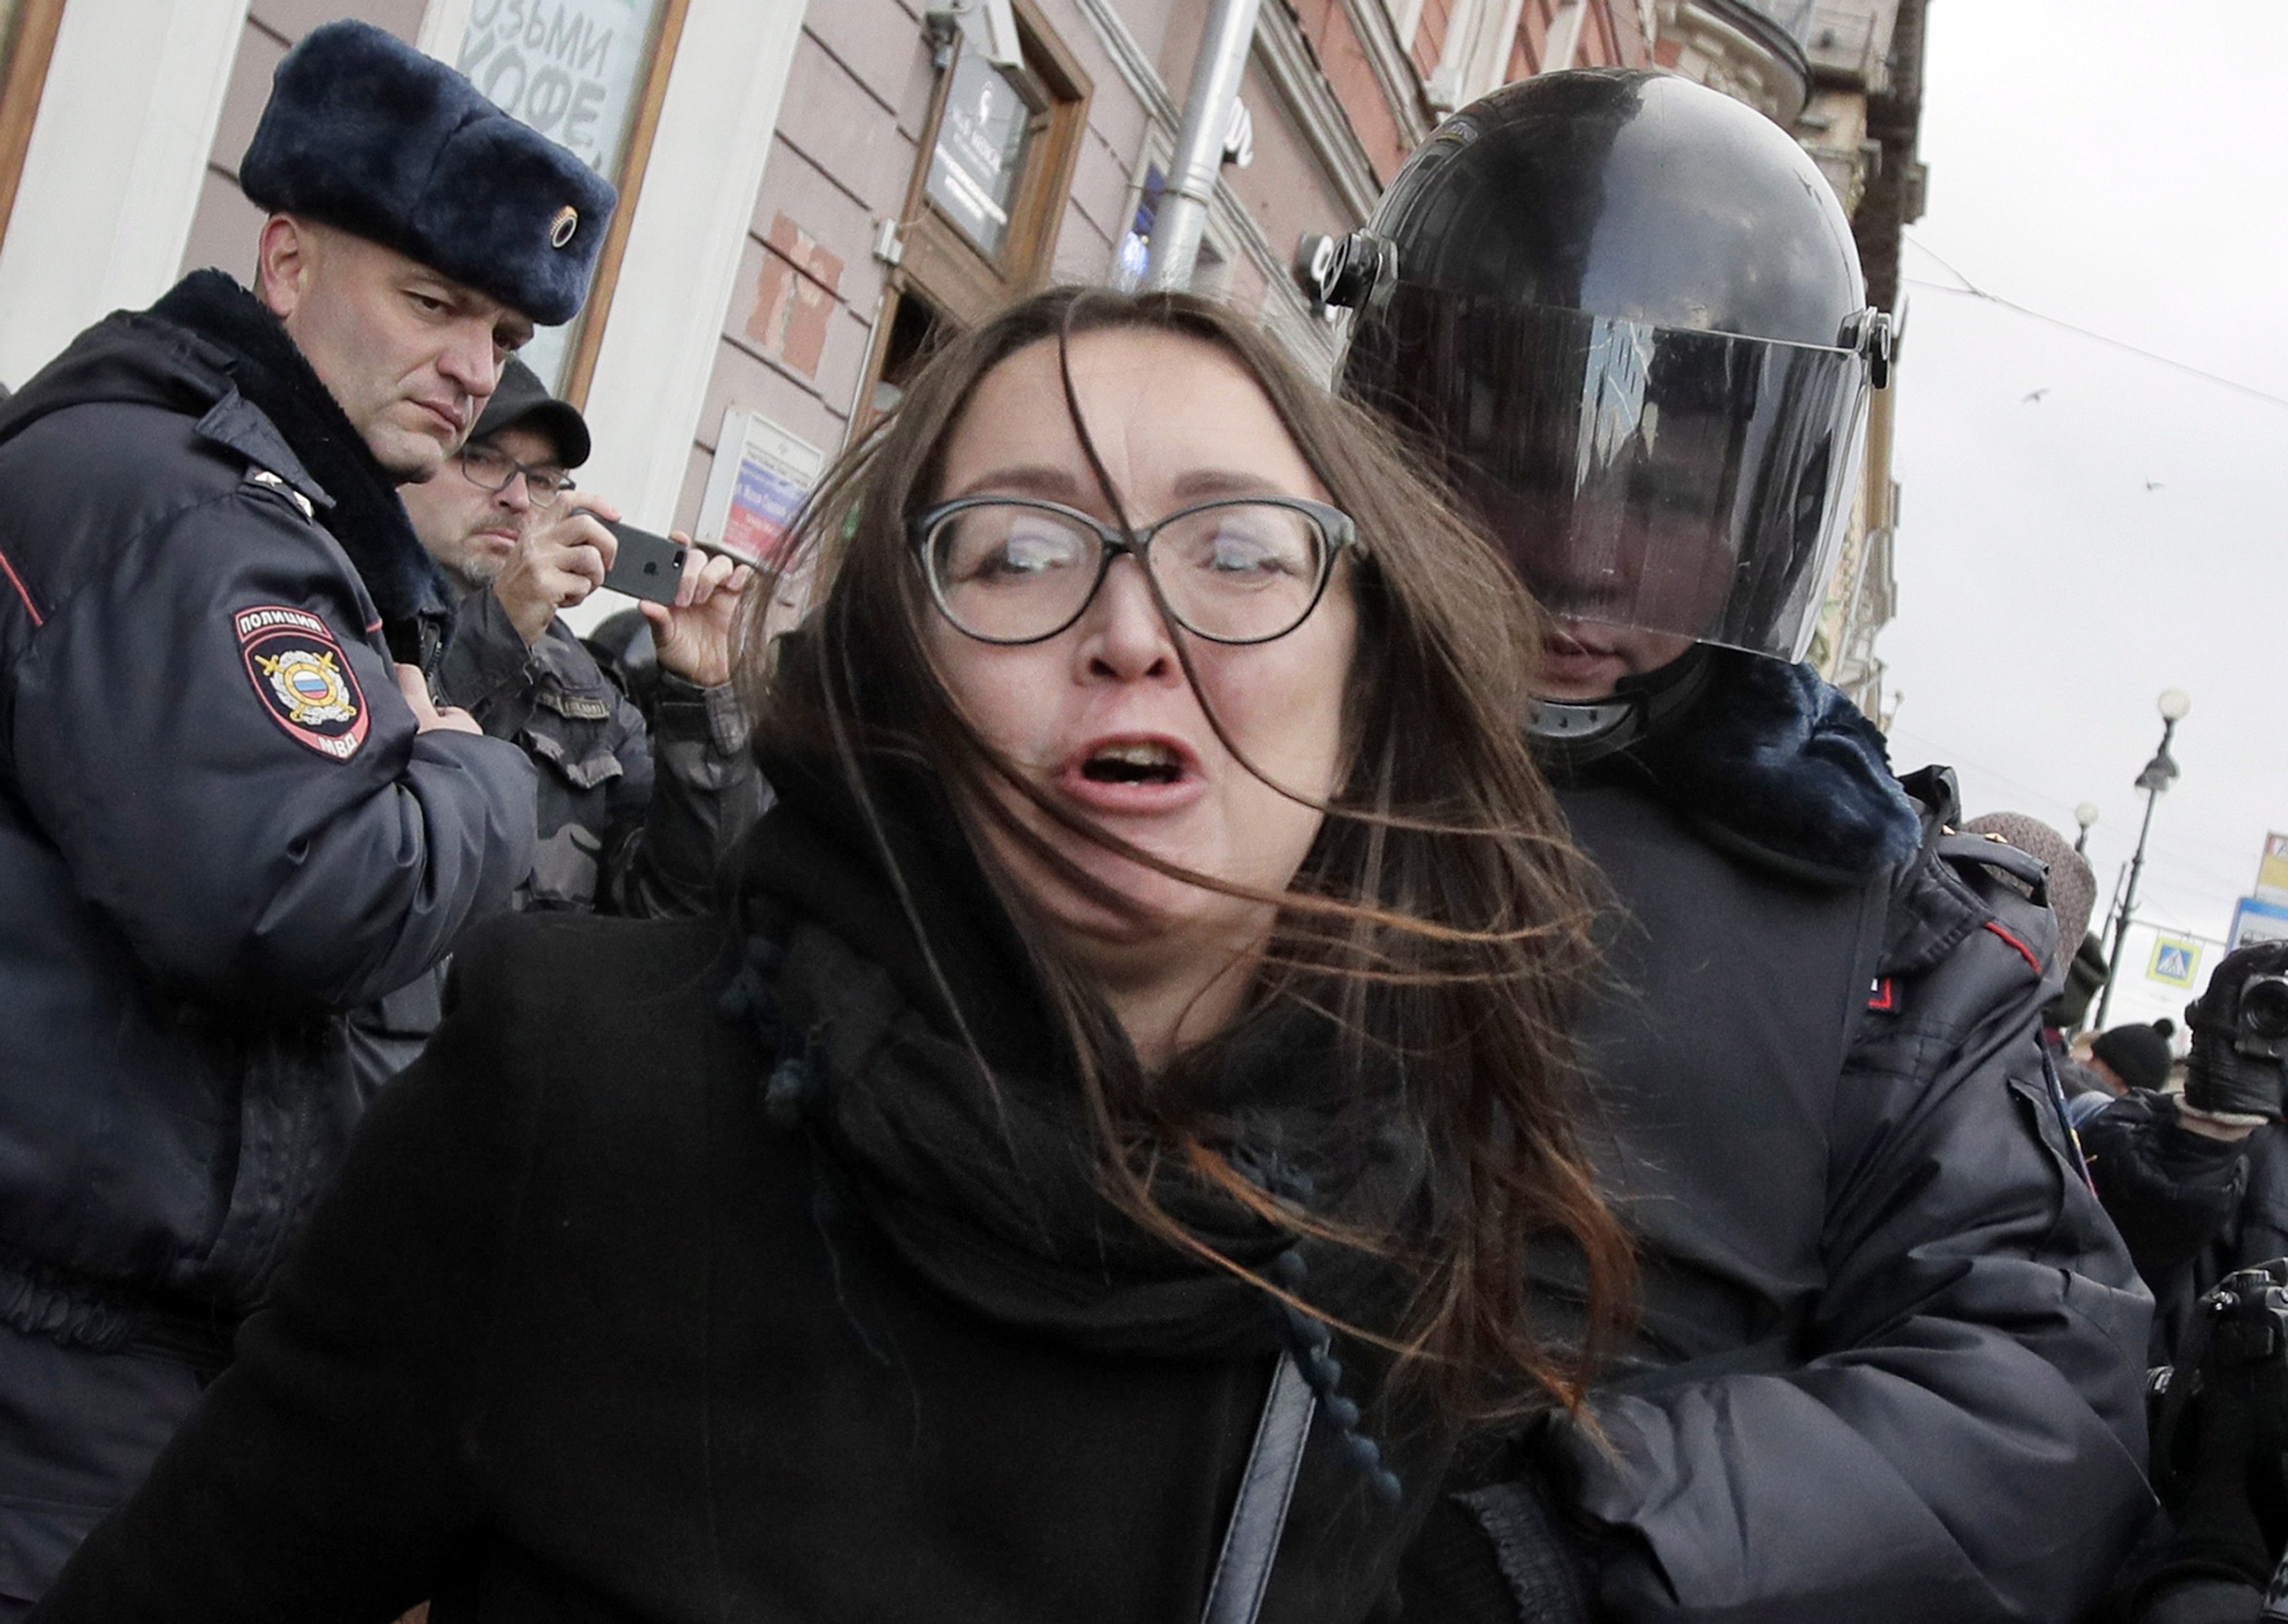 Police detain political and LGBT rights activist Yelena Grigoryev during a rally in St. Petersburg, Russia, in October 2018. She was murdered nine months later.